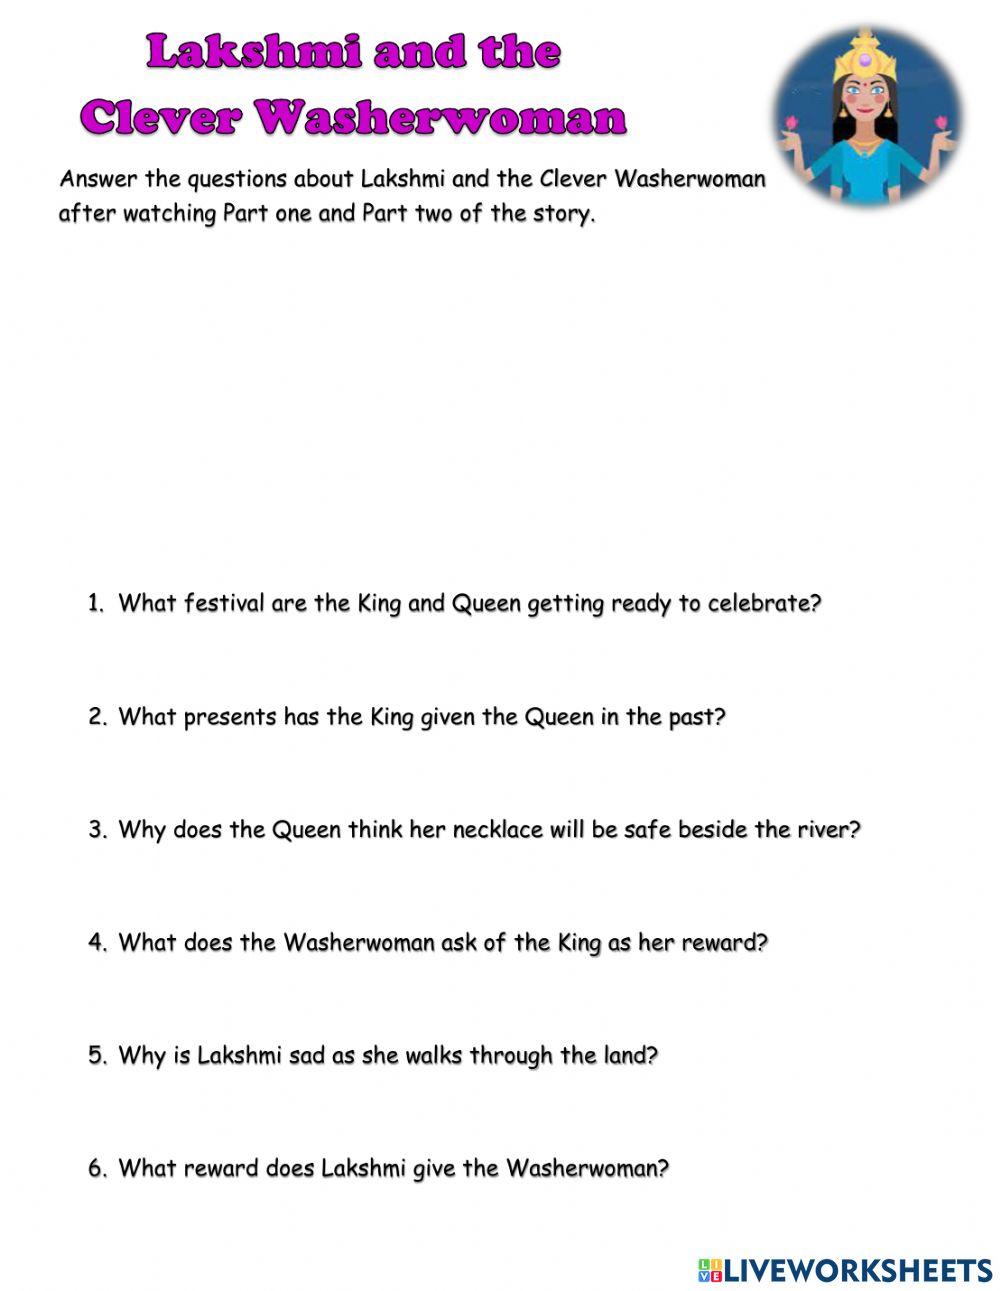 Lakshmi and the clever washerwoman